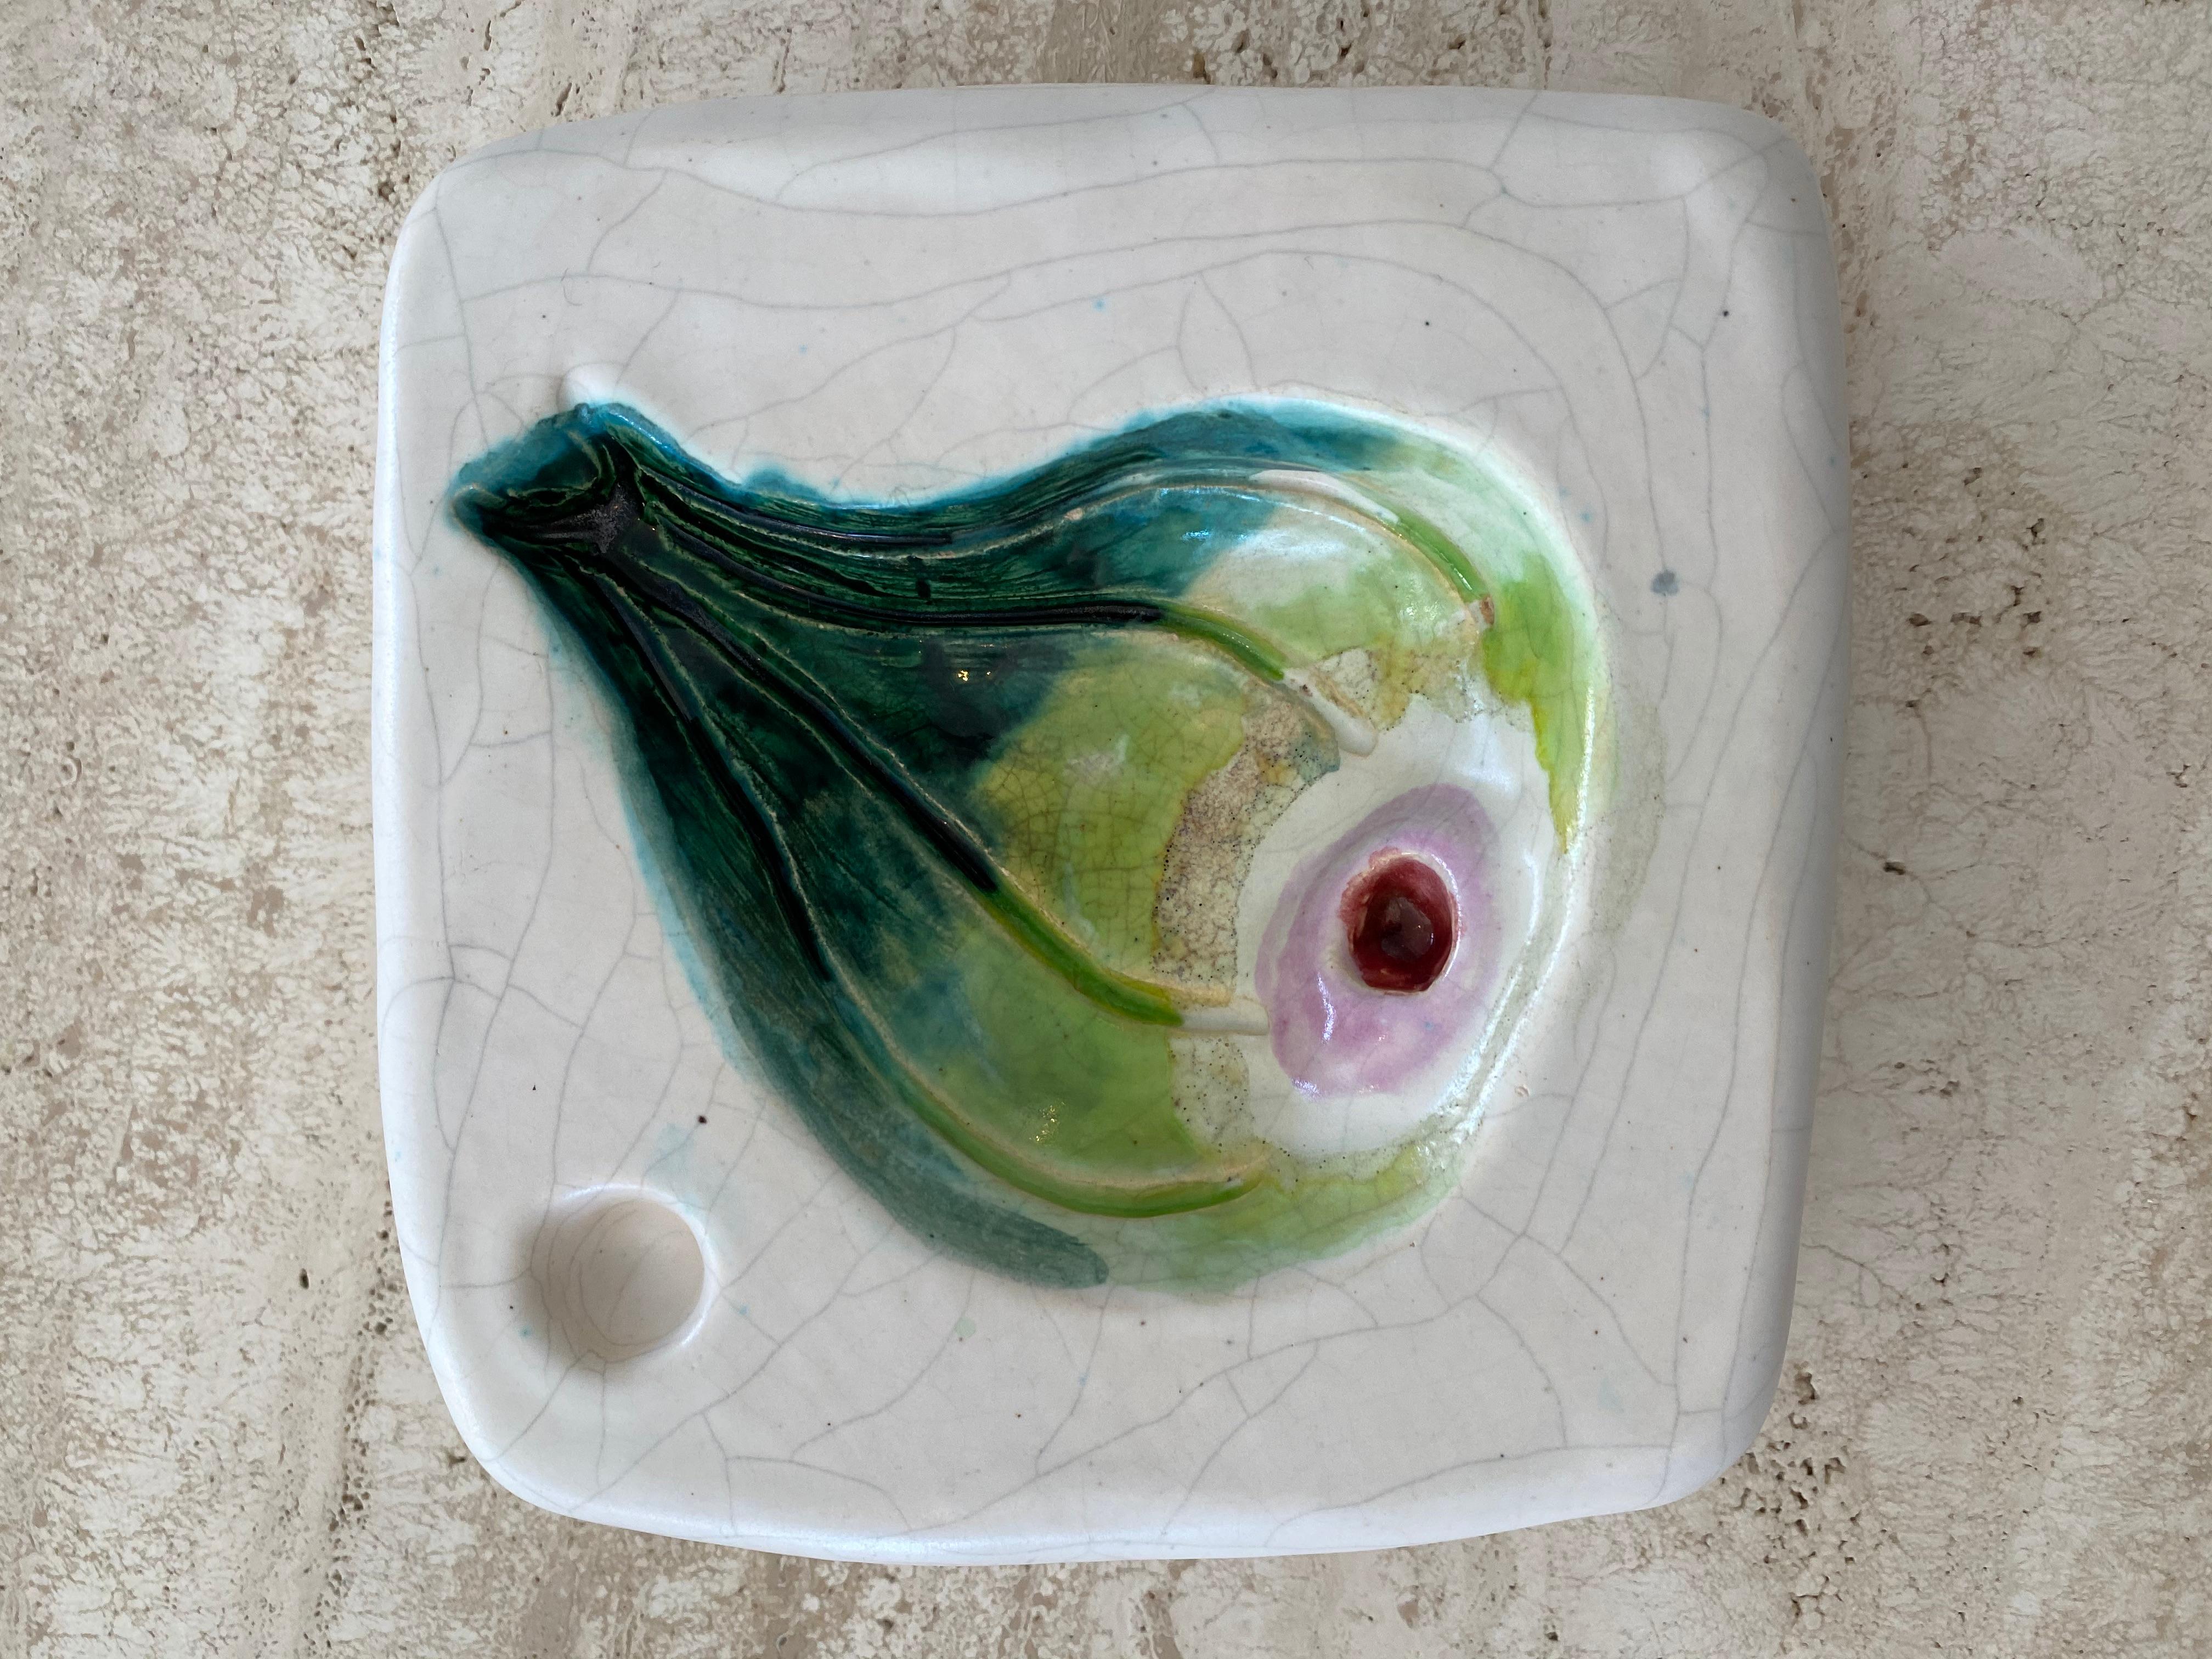 French master ceramic artist Georges Jouve ceramic cendrier ashtray or vide poche with image of a fig. Part of a series of fig, pear, apple and pomegranite. 
Signed Jouve and with his famous monogram plus this one was made for Saks Fifth Ave and